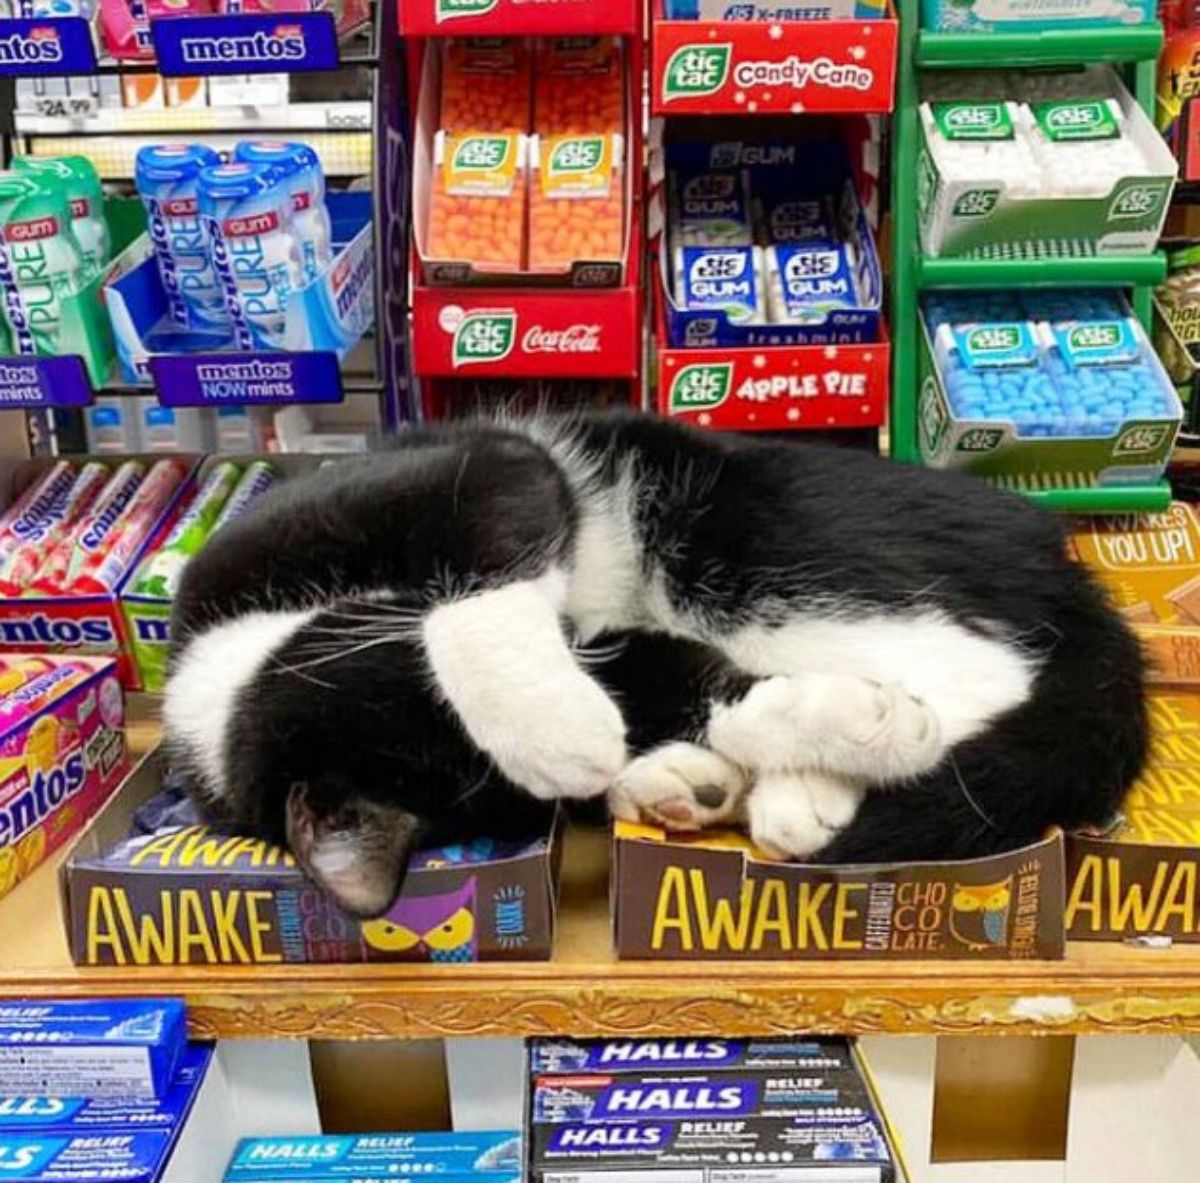 black and white cat sleeping on snacks in a store